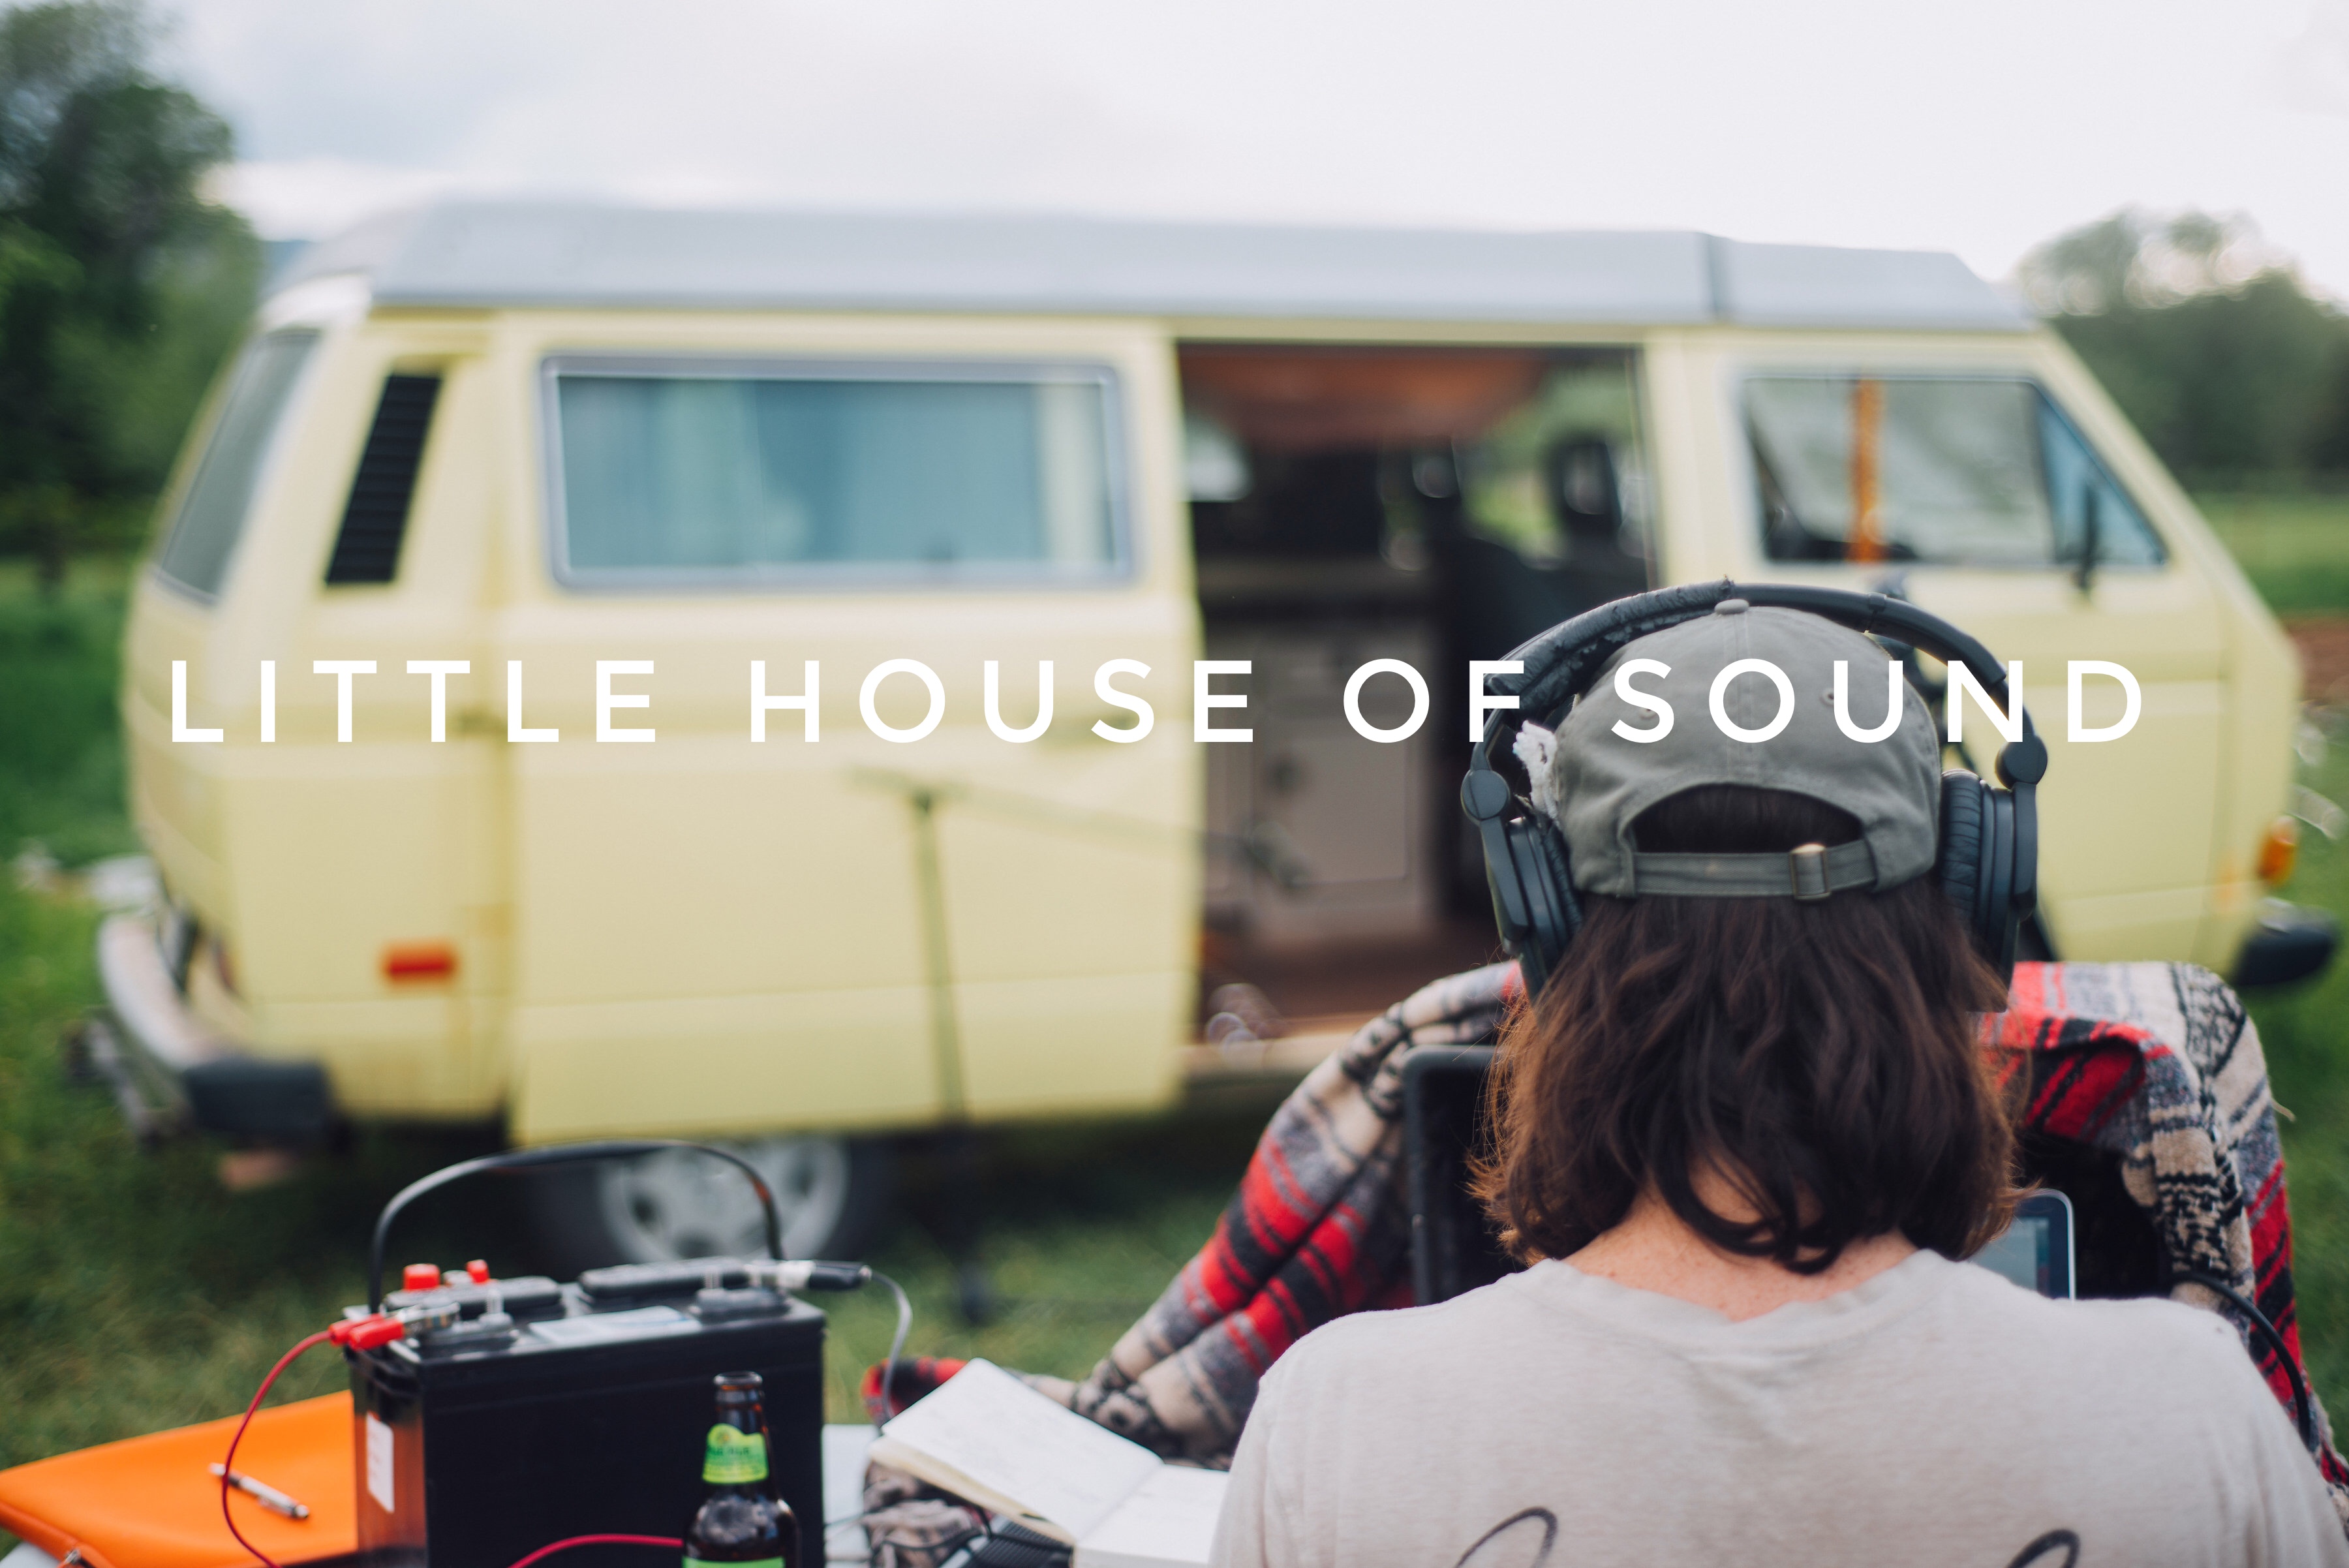 Little House of Sound